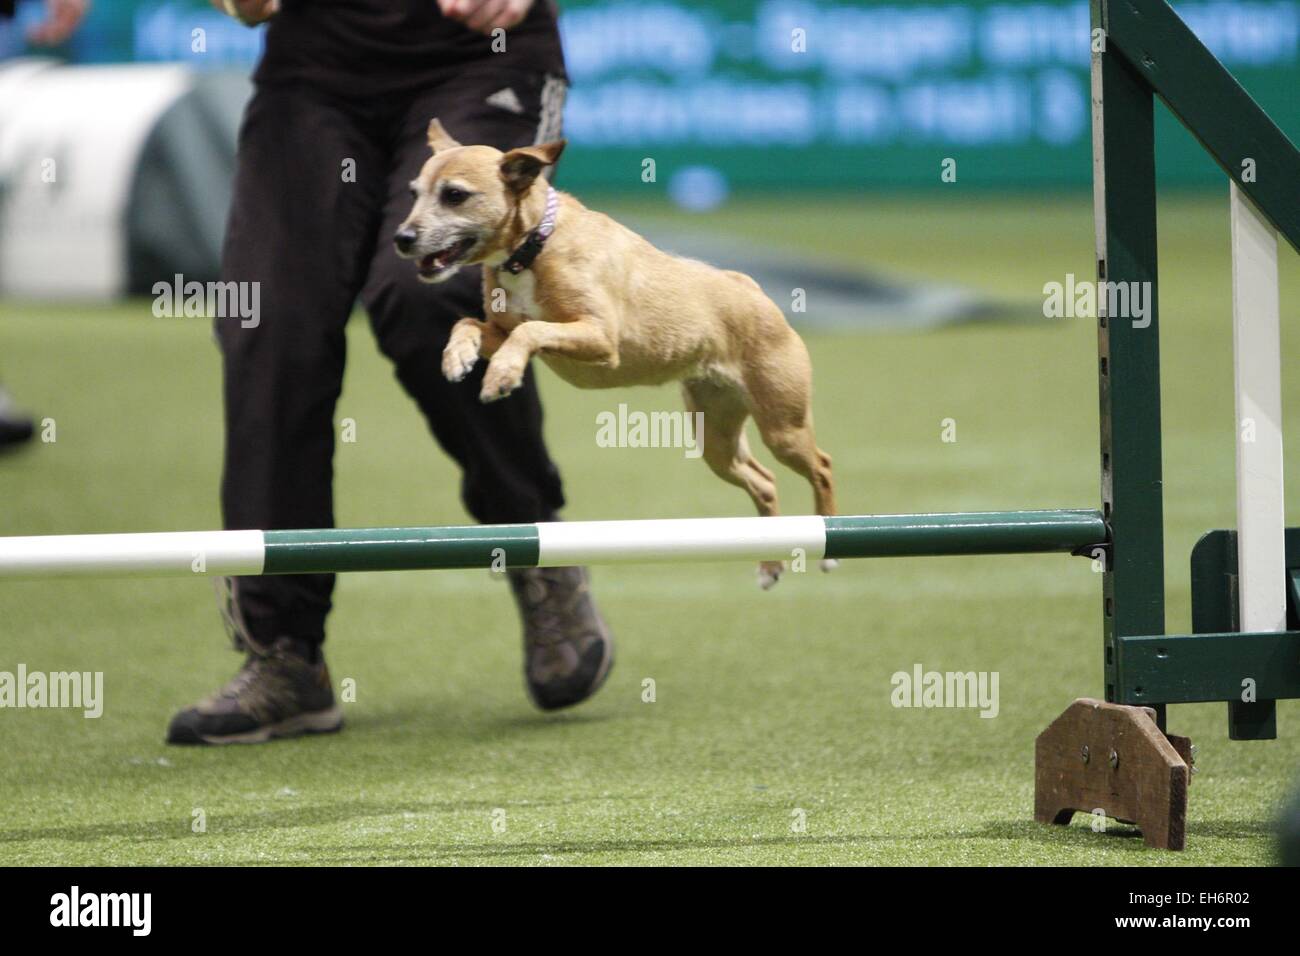 Birmingham, UK. 8th March, 2015. Dogs taking part in the Agility final at Crufts today in Birmingham, UK. Credit:  Jon Freeman/Alamy Live News Stock Photo